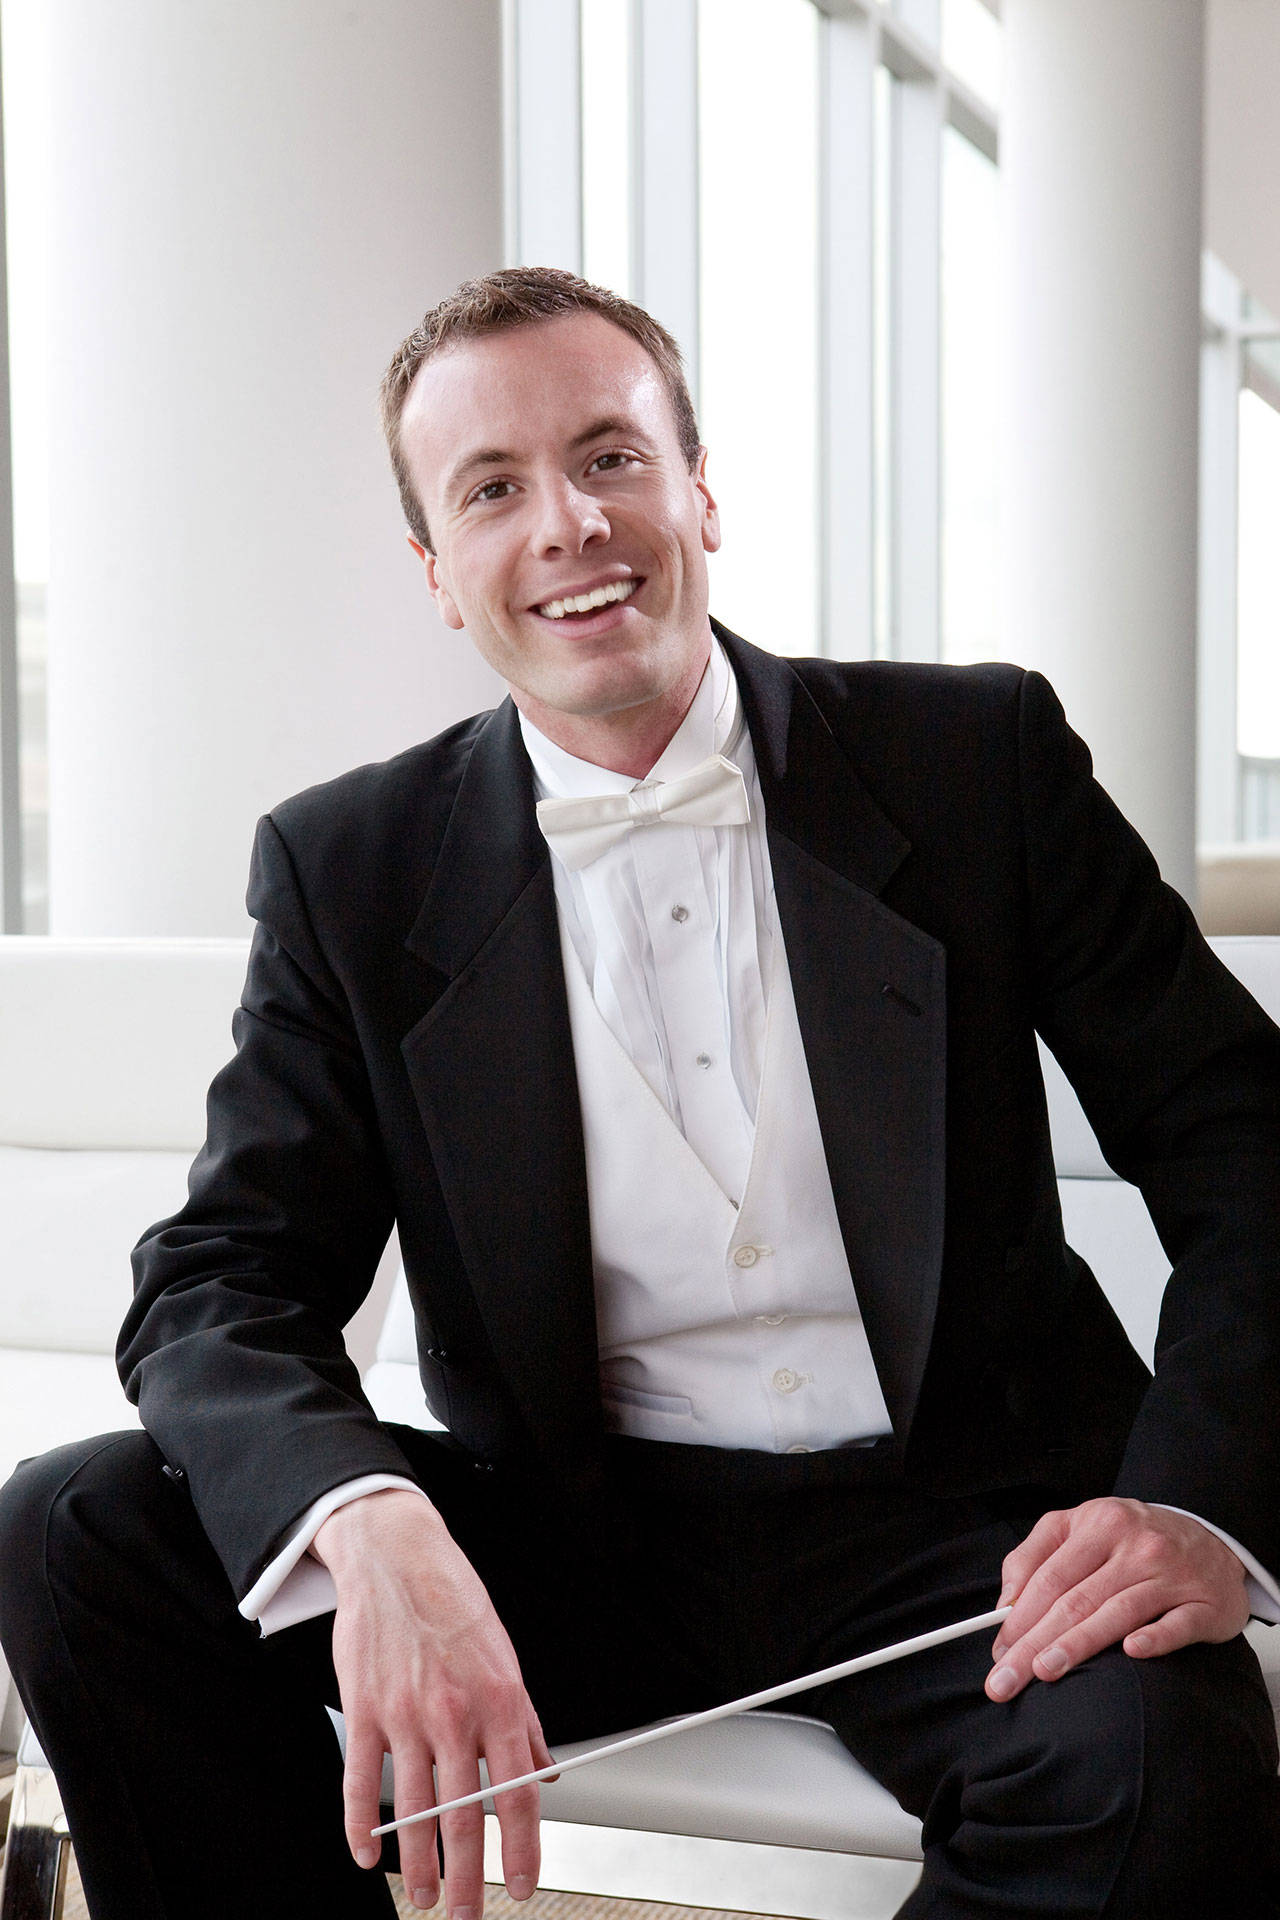 Wesley Schulz brings extensive national and international experience to his new challenge, conductor of the Auburn Symphony Orchestra. COURTESY PHOTO